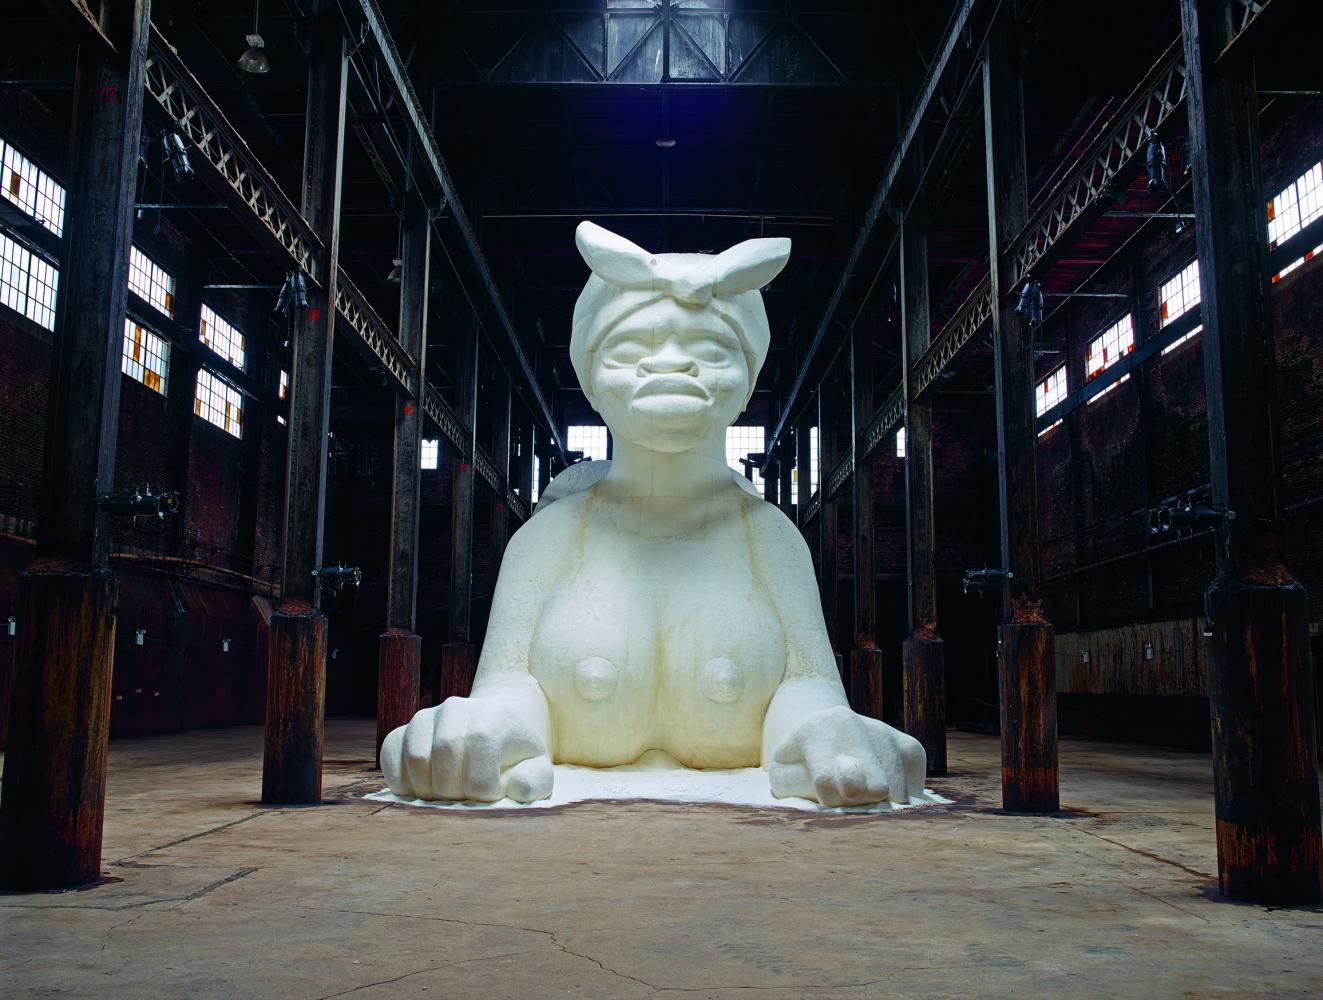 Installation Kara Walker "A Subtlety, or the Marvelous Sugar Baby, an Homage to the unpaid and overworked Artisans who have refined our Sweet tastes from the Cane fields to the Kitchens of the New World on the Occasion of the demolition of the Domino Sugar Refining Plant", 2014